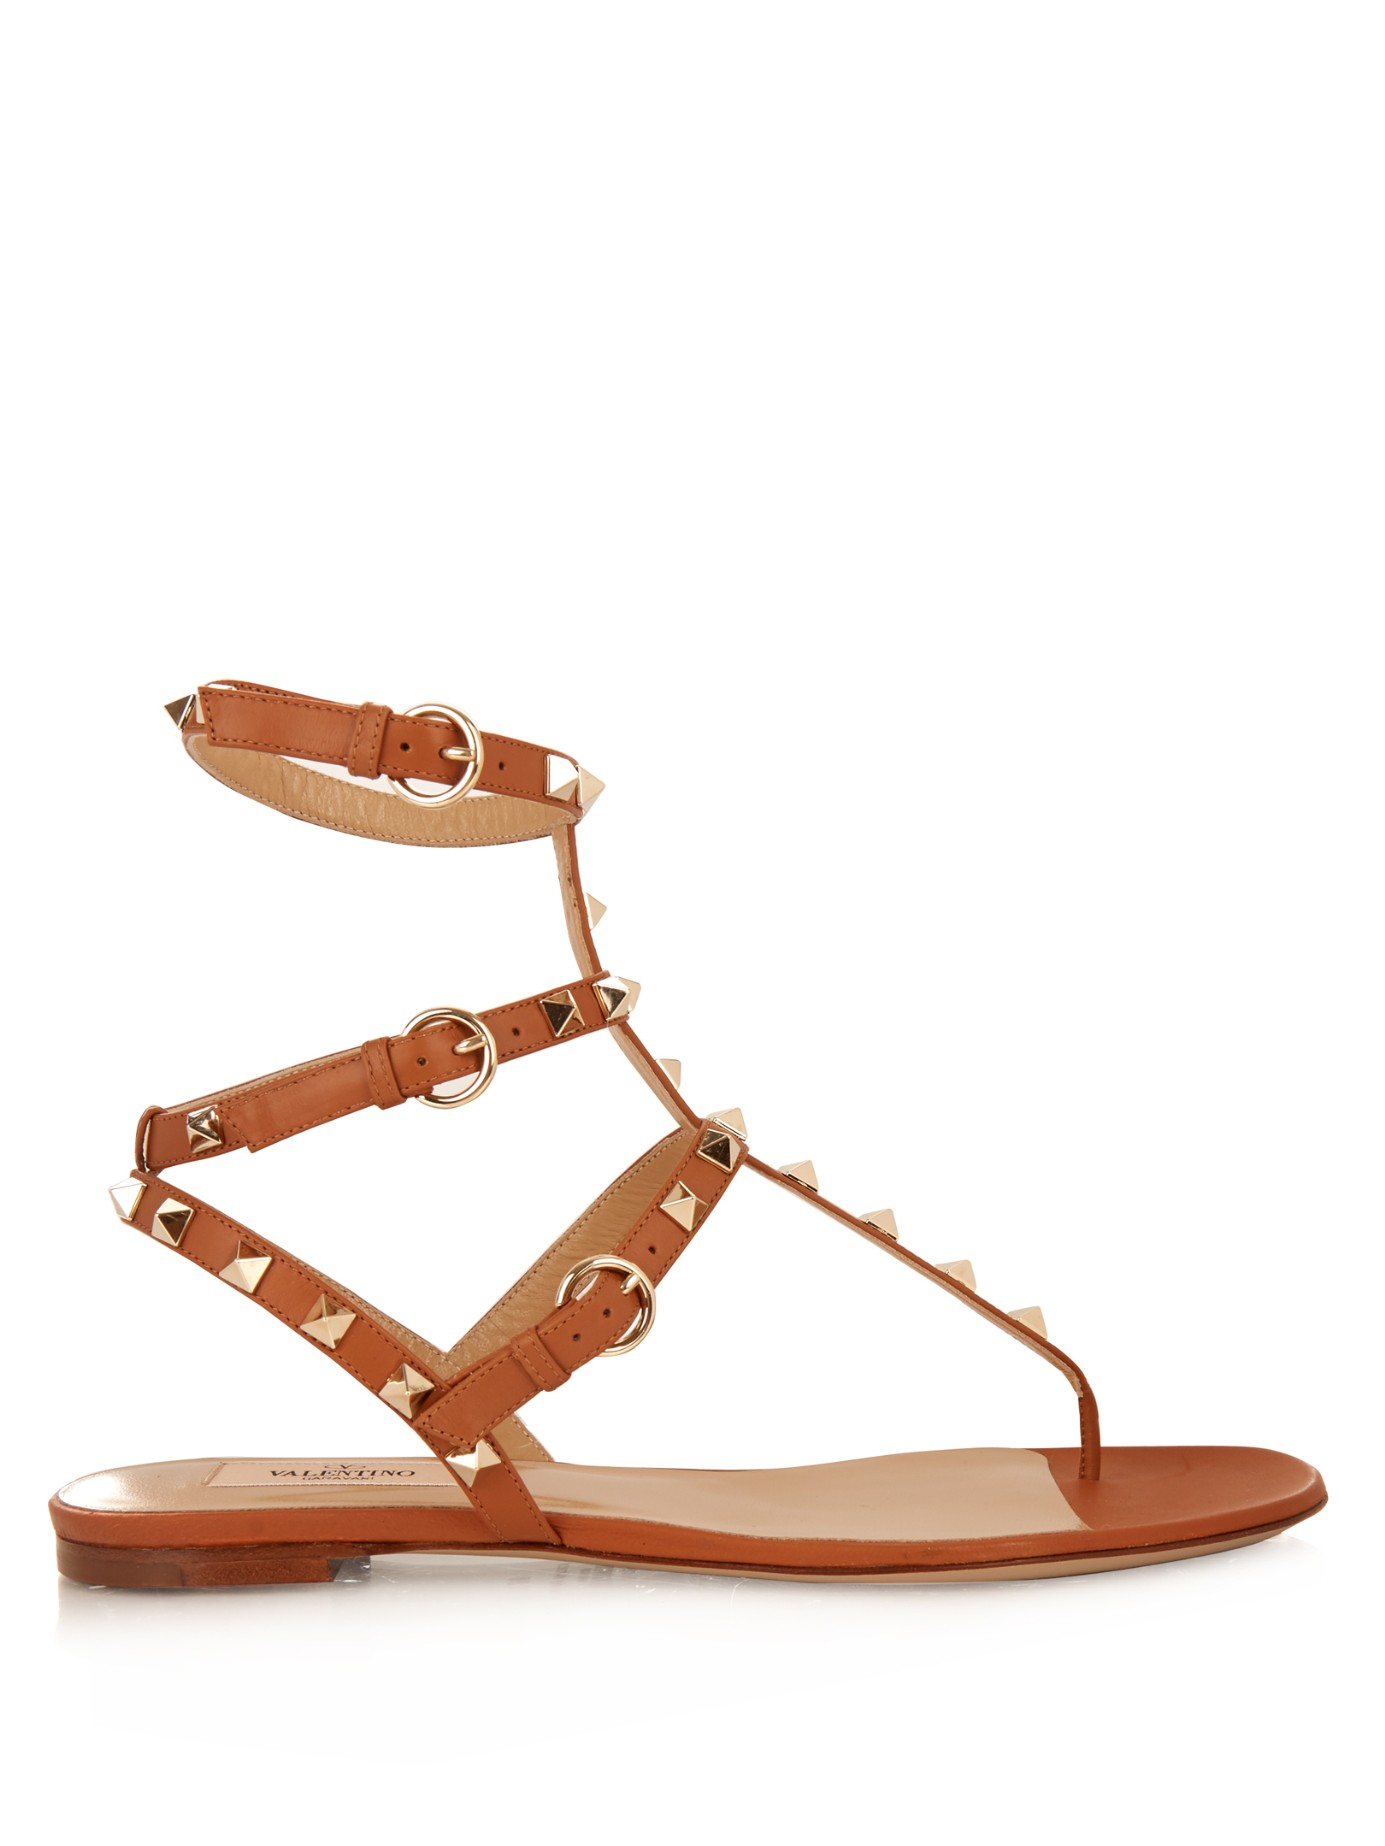 Lyst - Valentino Rockstud Leather Sandals in Brown